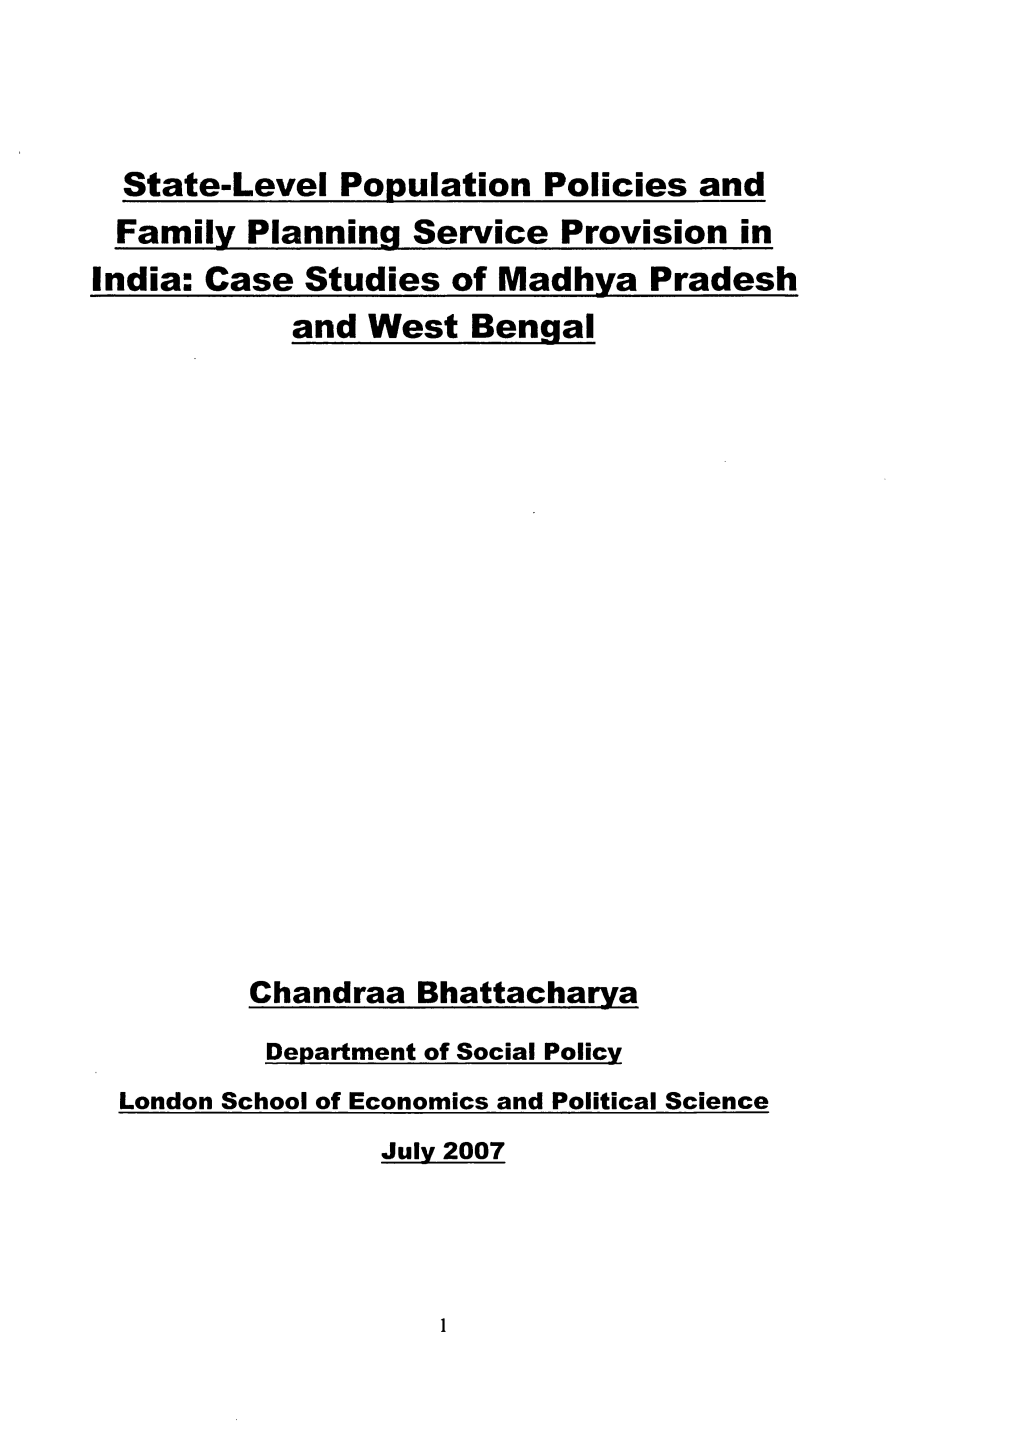 State-Level Population Policies and Family Planning Service Provision in India; Case Studies Off Madhya Pradesh and West Bengal